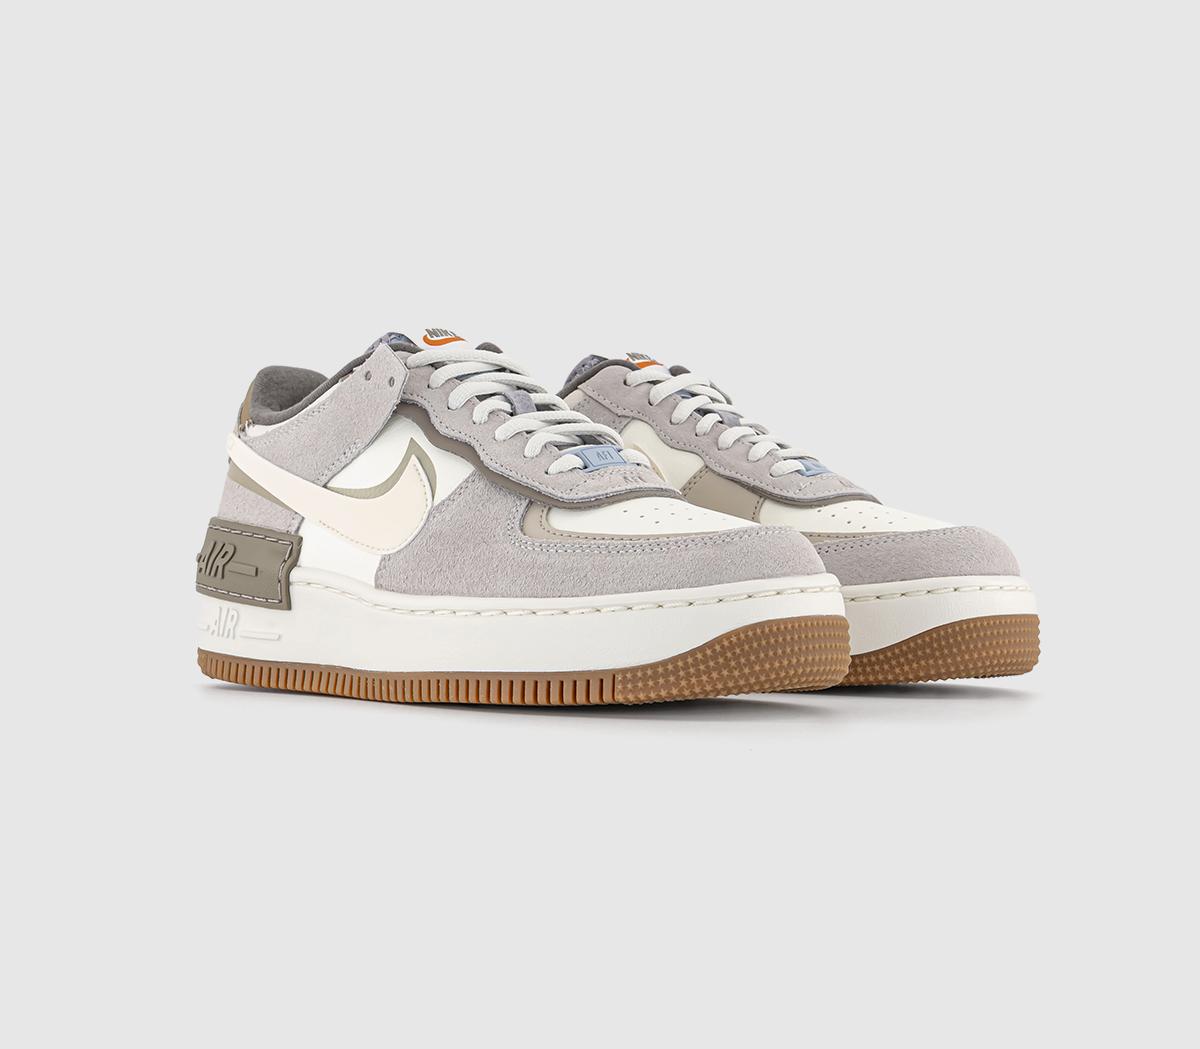 Nike Air Force 1 Shadow Trainers Sail Pale Ivory Grey Fog Provence Purple Cave White, 3.5